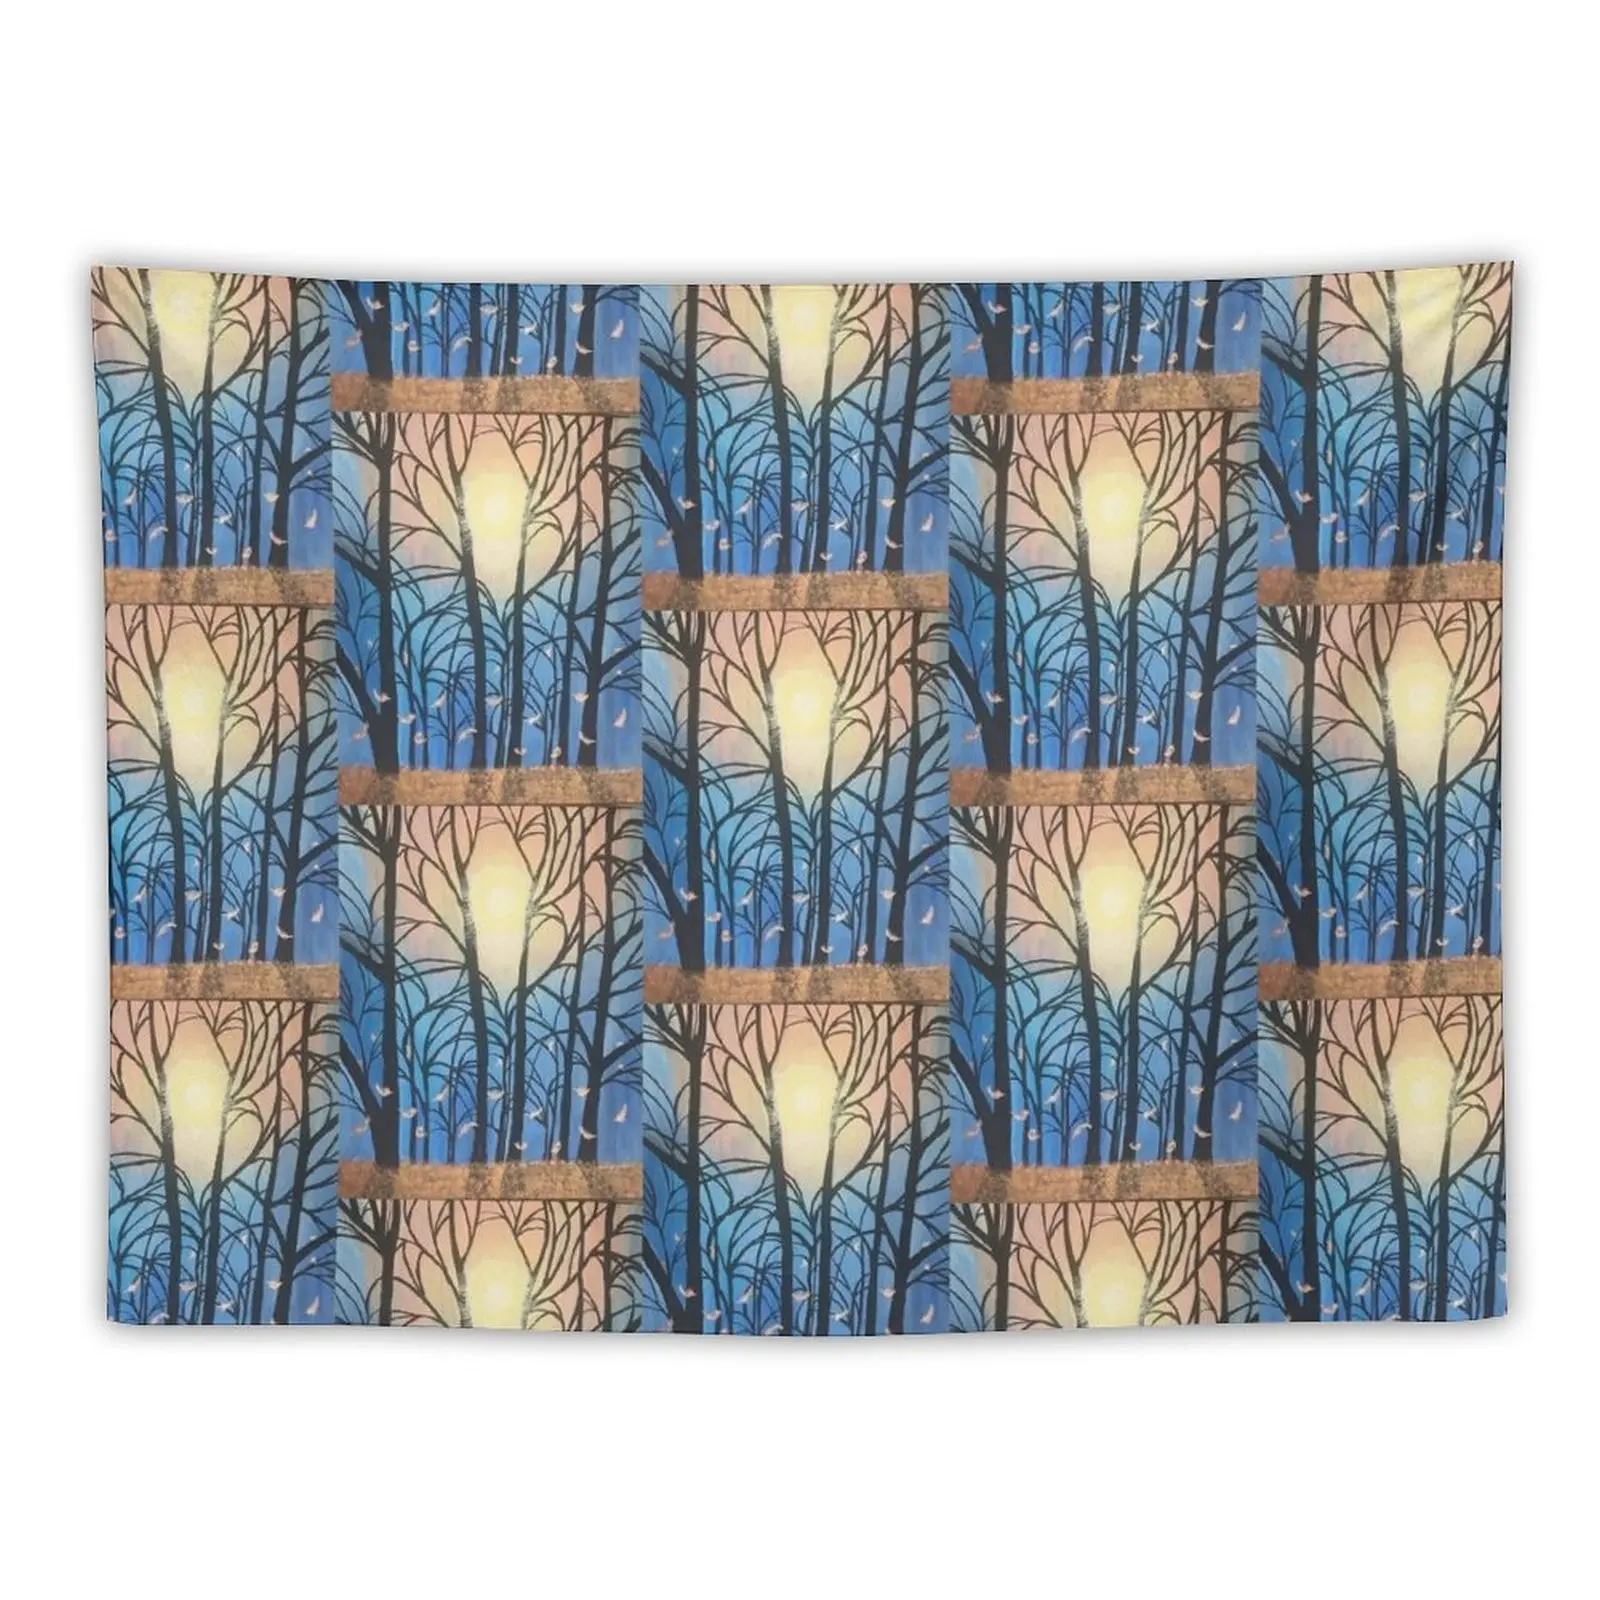 

Feathers at twilight Tapestry Room Decorations Custom Tapestry Room Decorator Tapestry Wall Hanging